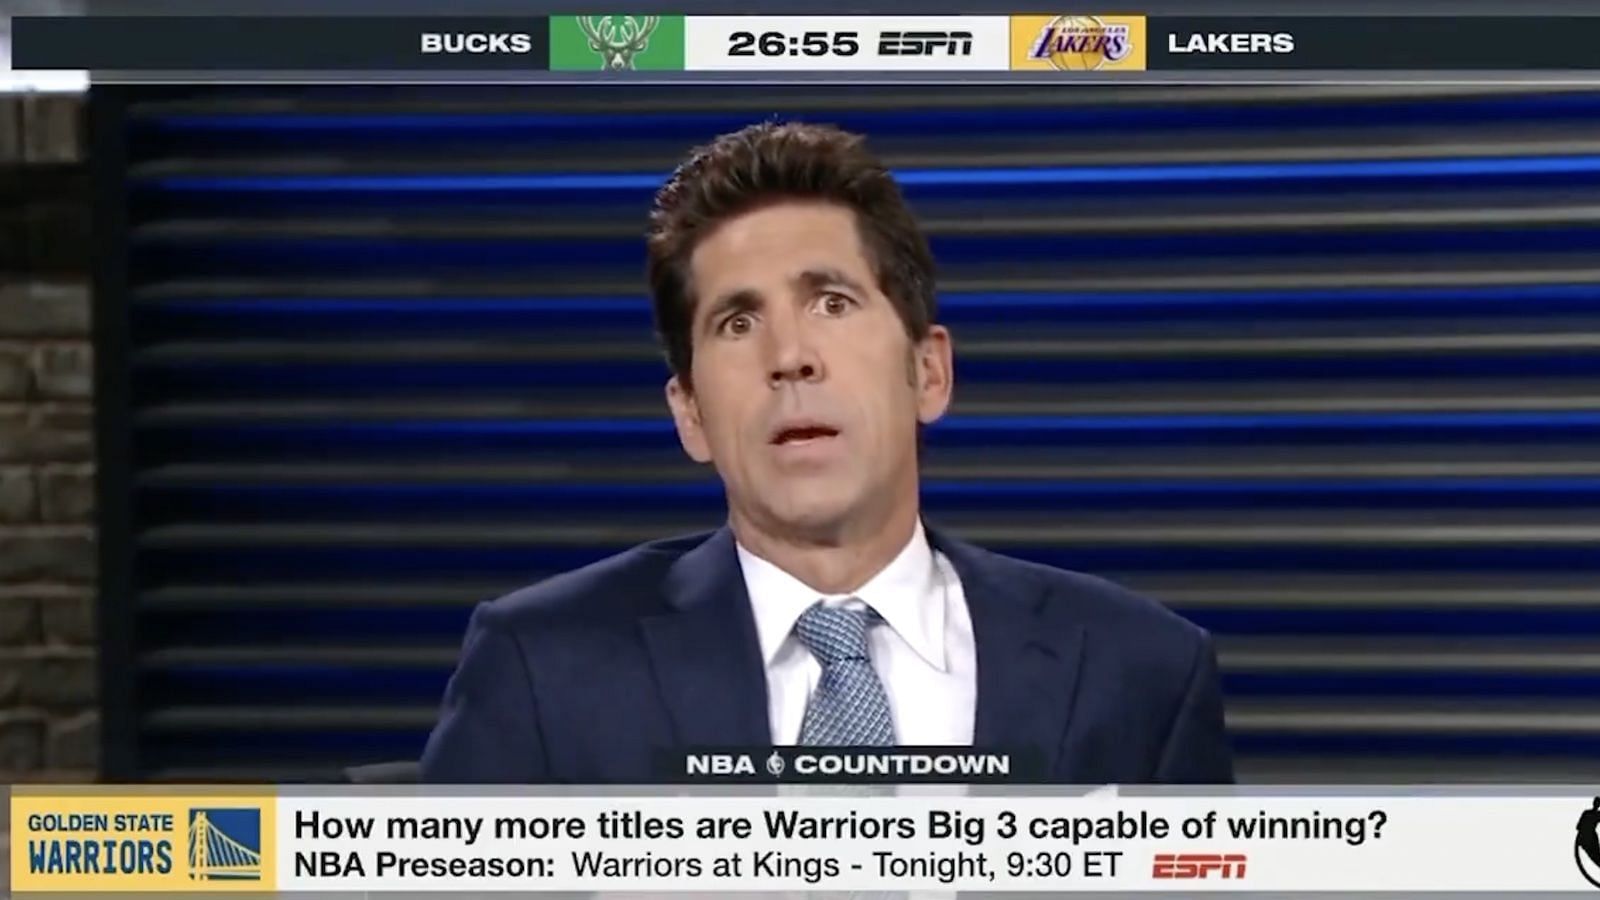 Bob Myers currently works for ESPN.